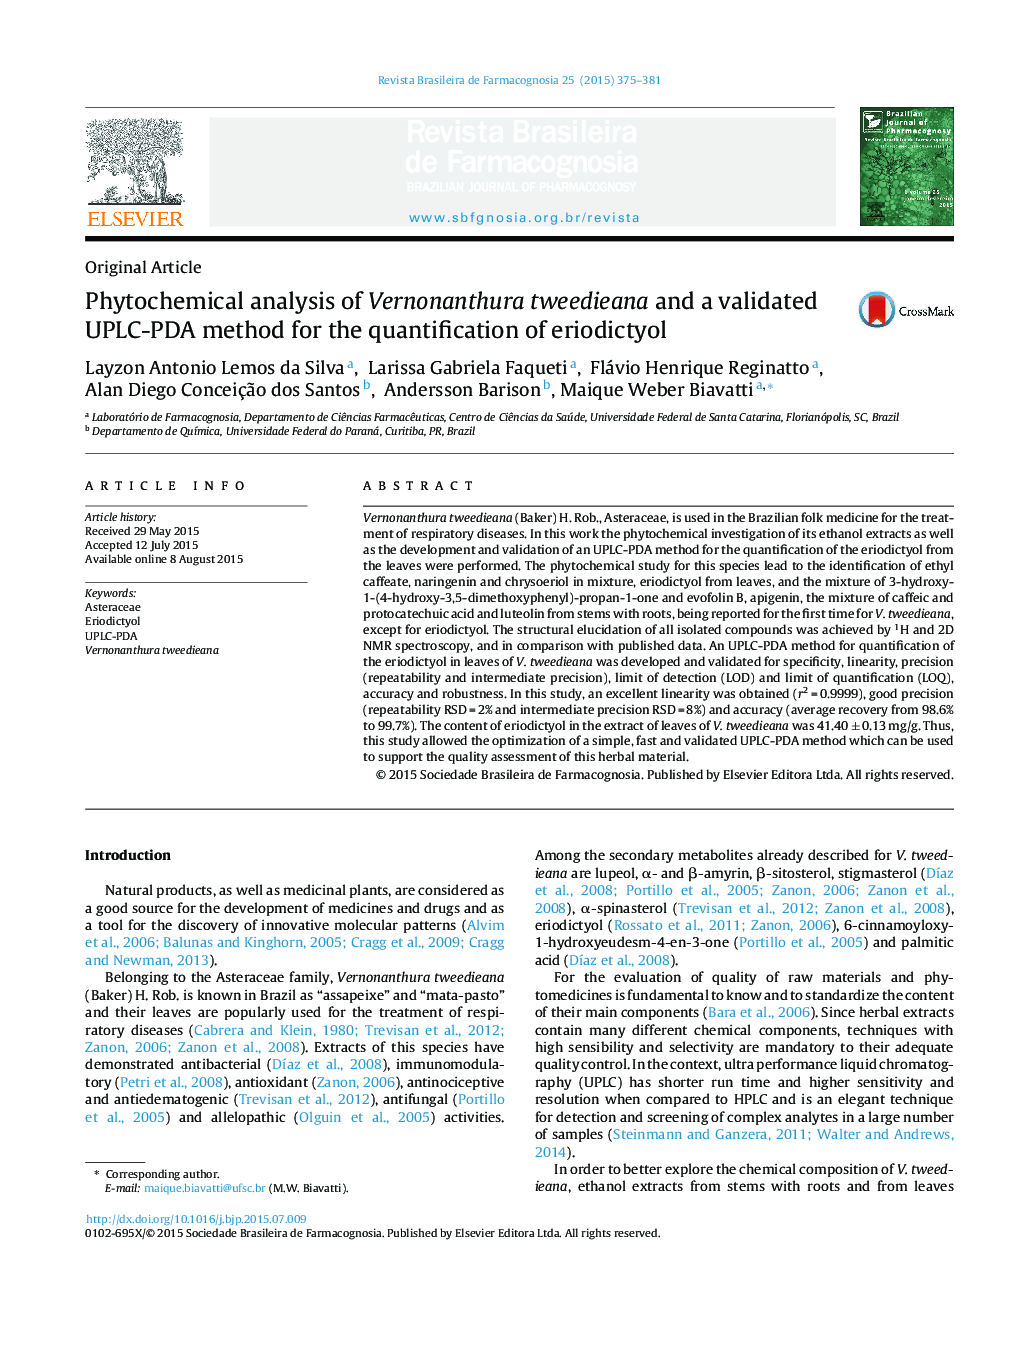 Phytochemical analysis of Vernonanthura tweedieana and a validated UPLC-PDA method for the quantification of eriodictyol